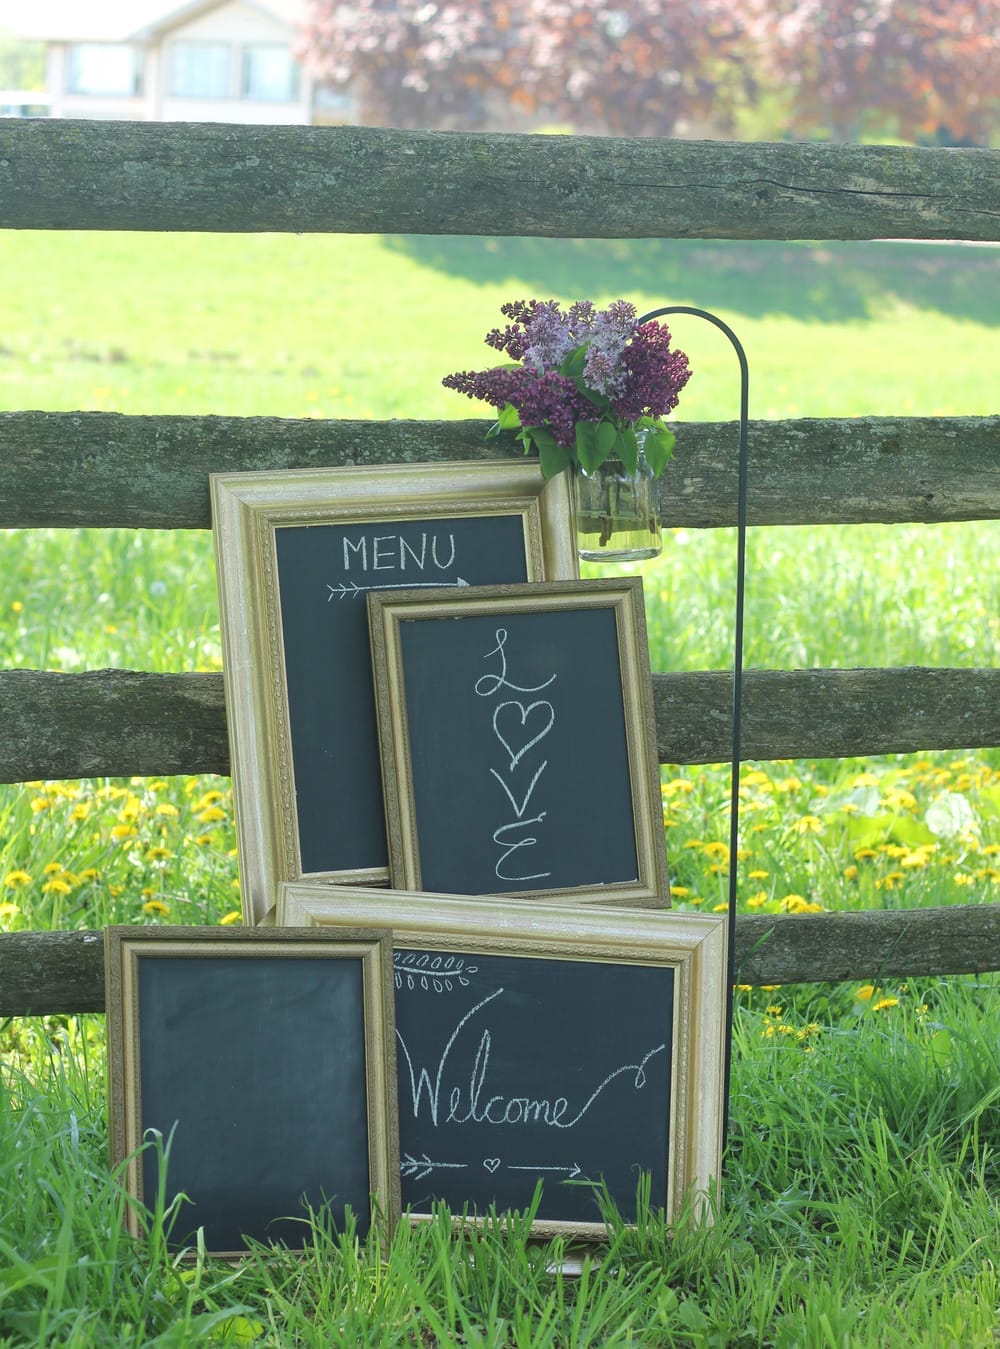 Country Lane 10+ Places To Rent Chalkboards in Toronto